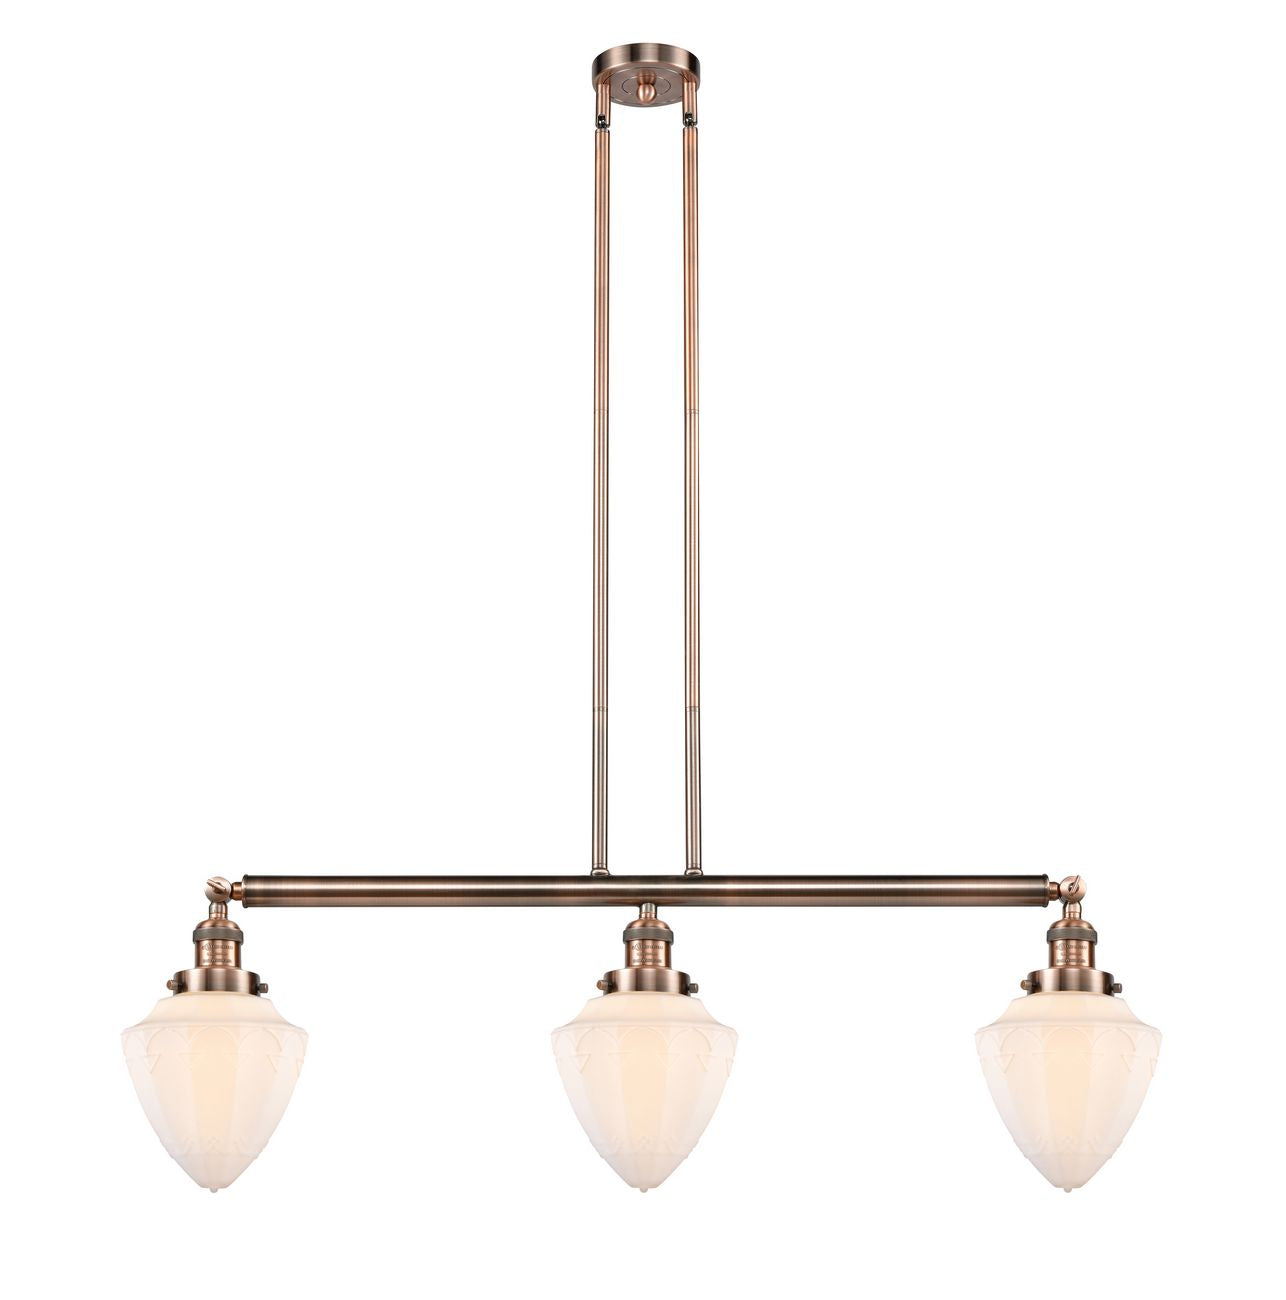 213-AC-G661-7 3-Light 38" Antique Copper Island Light - Matte White Cased Small Bullet Glass - LED Bulb - Dimmensions: 38 x 7 x 15.25<br>Minimum Height : 24.25<br>Maximum Height : 48.25 - Sloped Ceiling Compatible: Yes